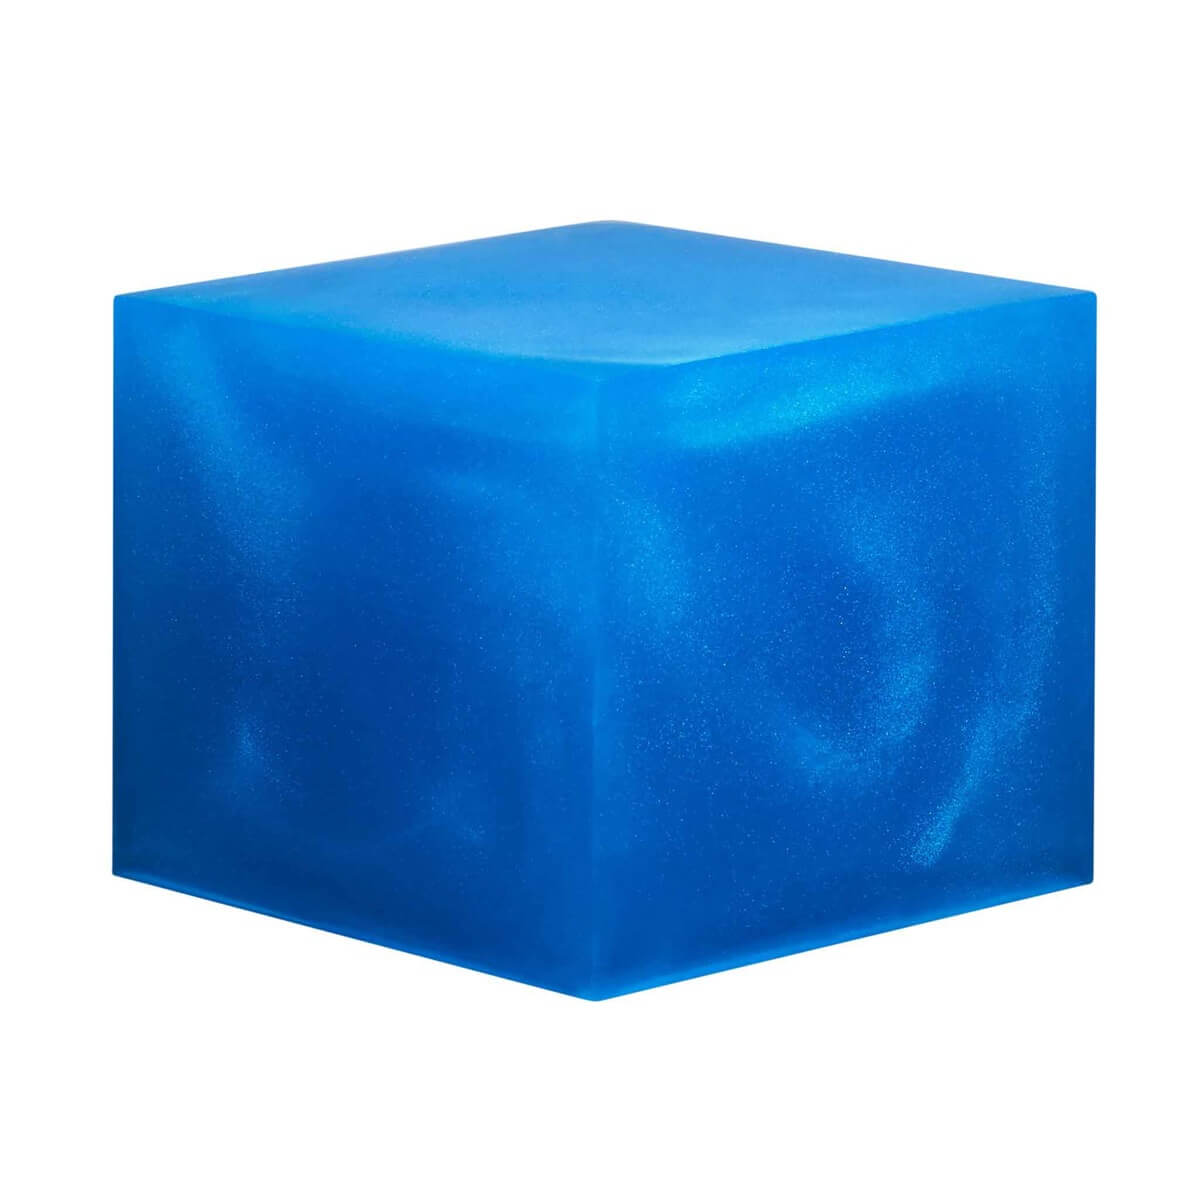 A resin cube made with the Real Royal Blue Mica Powder Pigment by Pigmently.